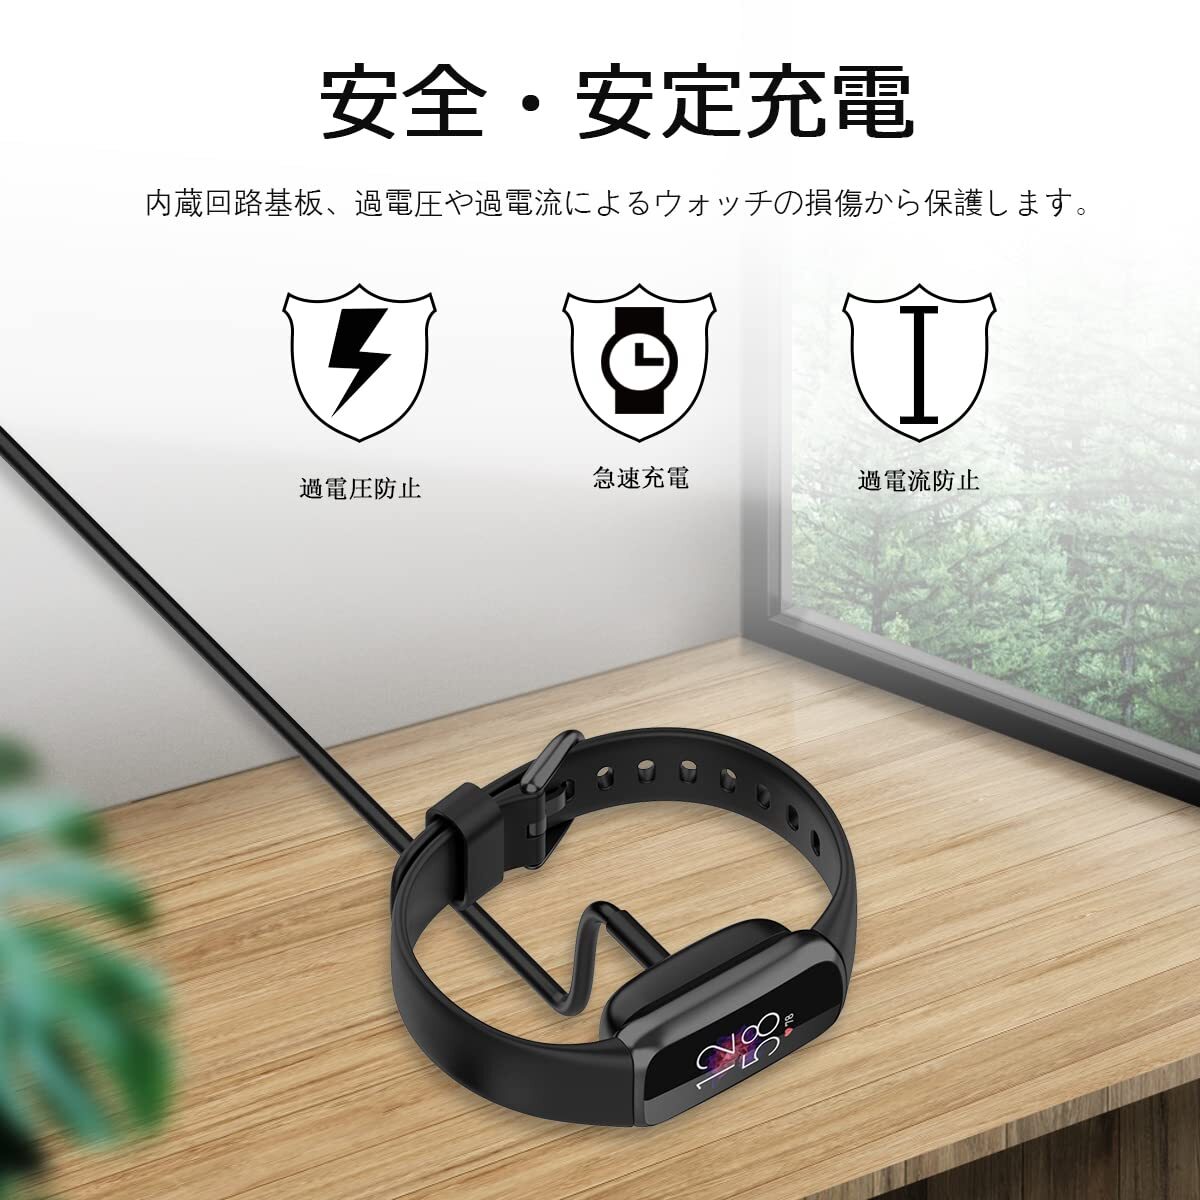 Seltureone Fitbit Luxe / Charge 5 / Charge 6用 充電ケーブル 1メートル 磁気吸着 USB充電 高耐久_画像6